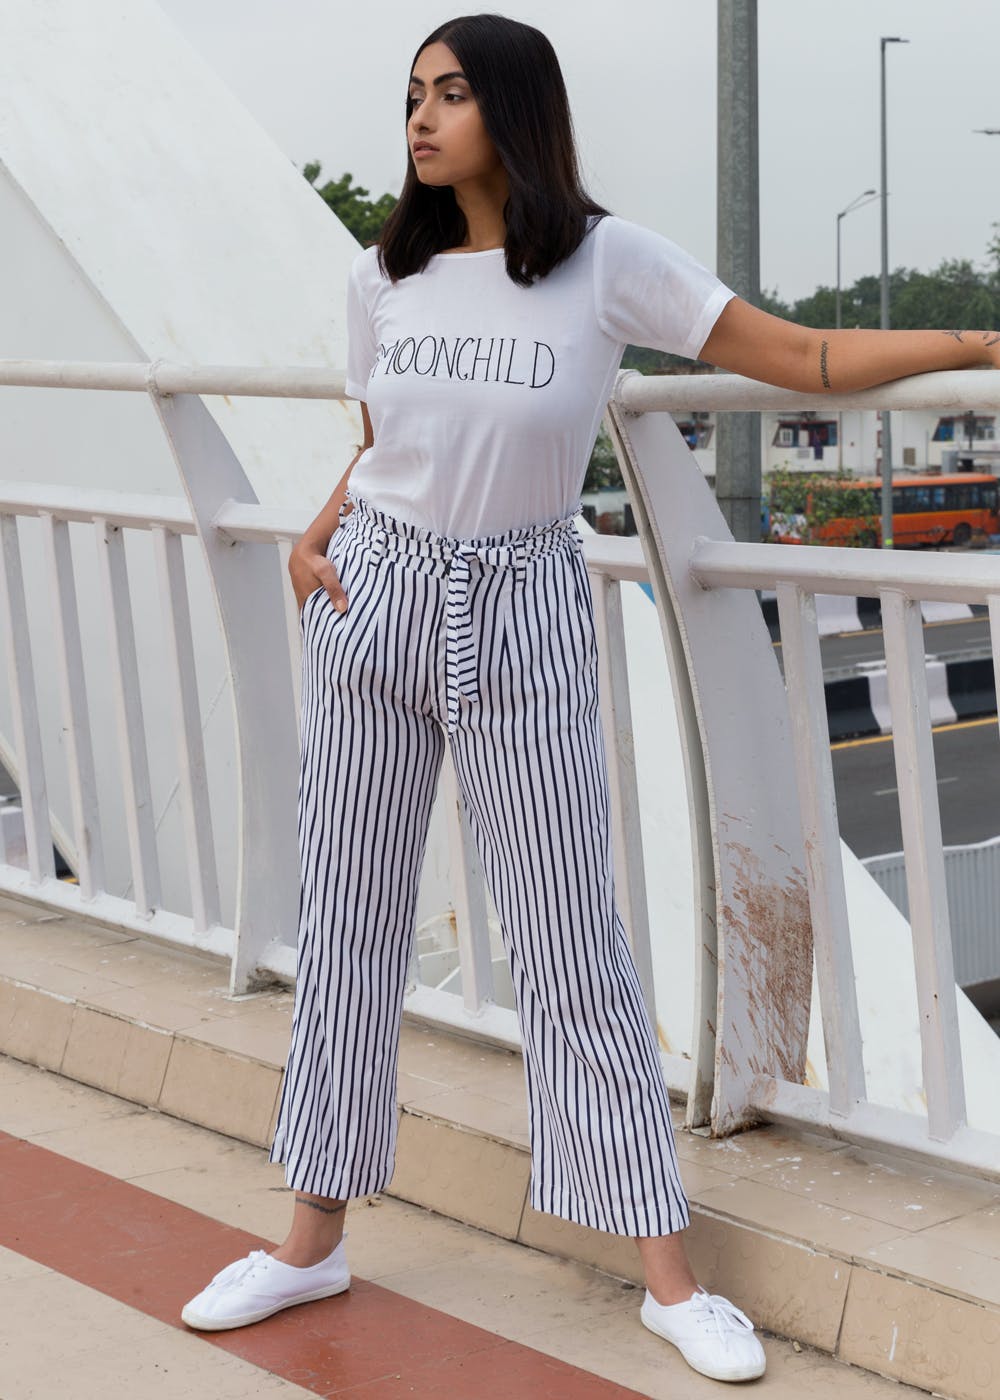 15 Feminine Outfits With Striped Wide Leg Pants  Styleoholic